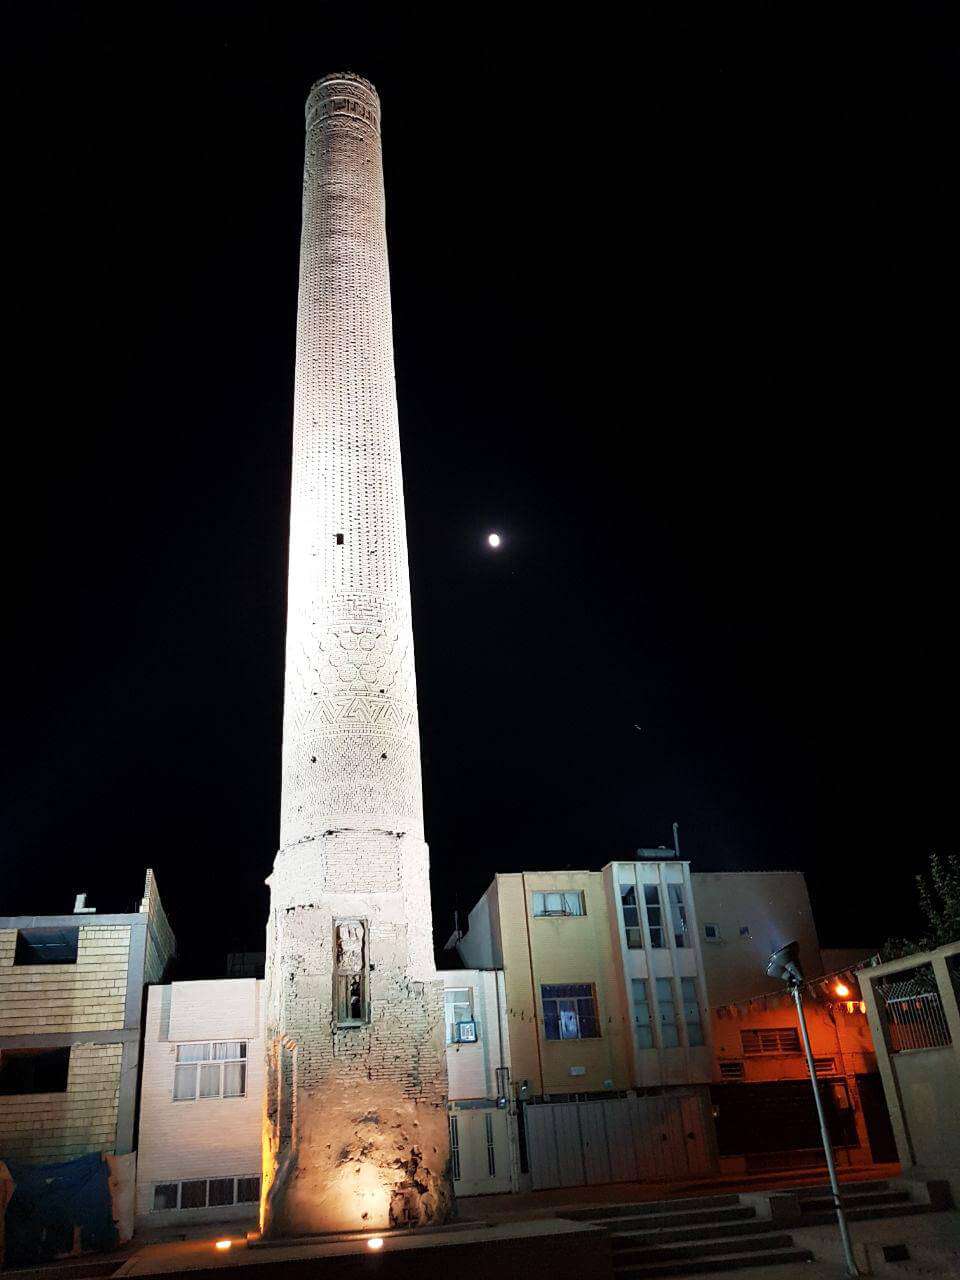 The Soaring Journey in the City of Minarets (Isfahan)